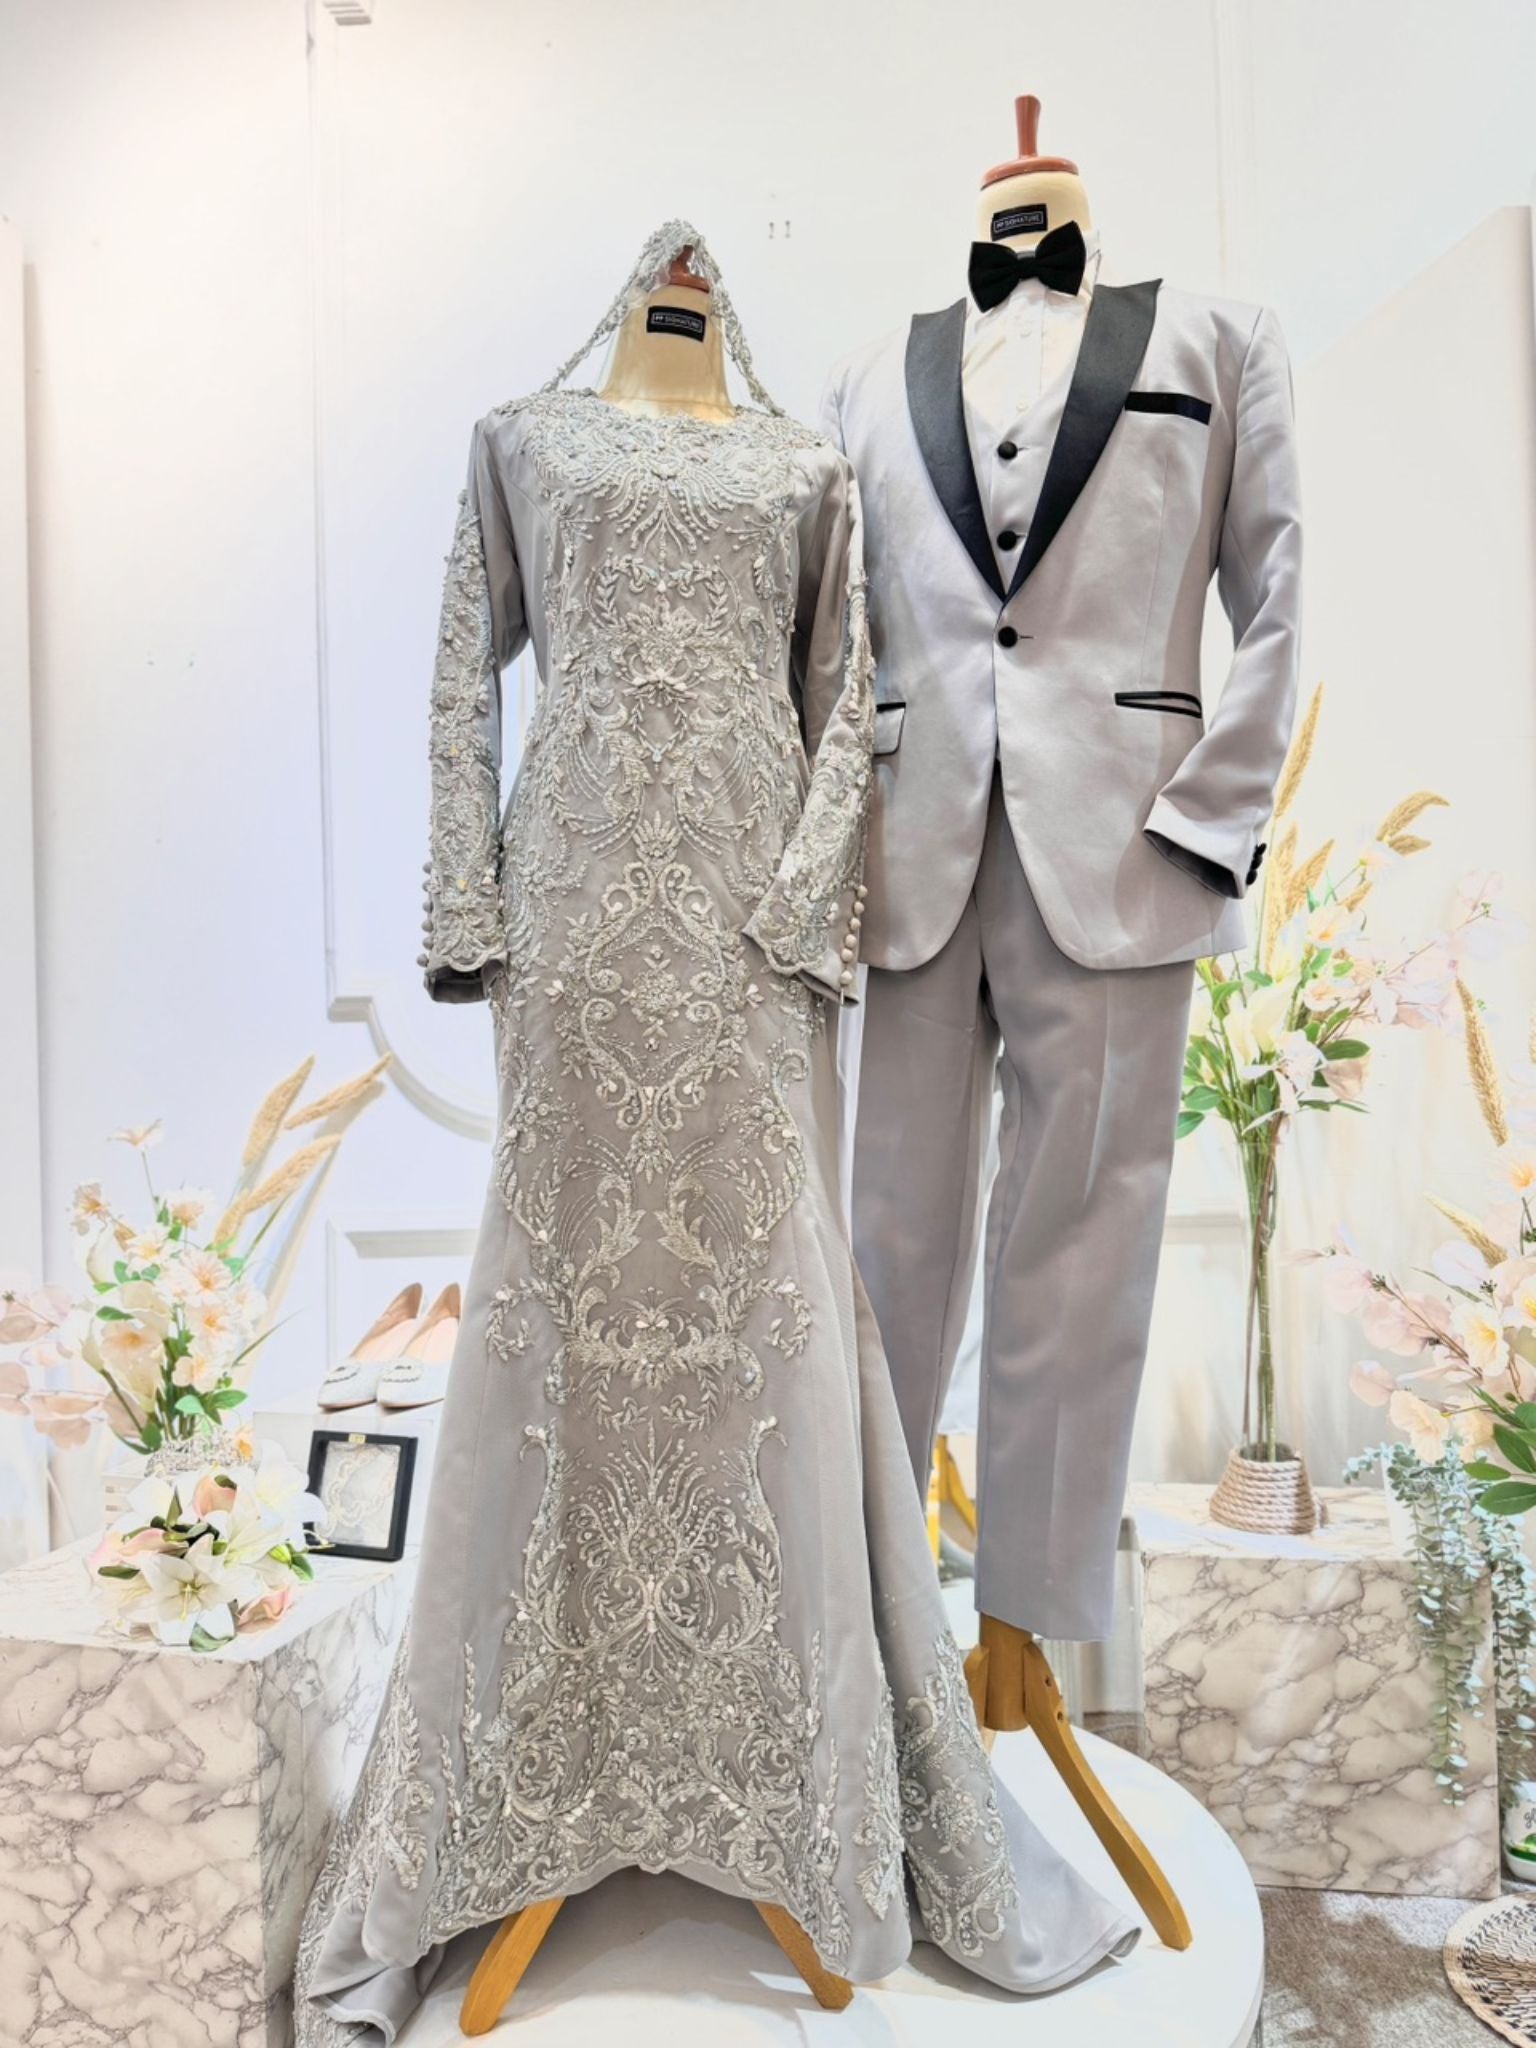 LUMIERE - Silver Grey Duchess Trumpet Dress with Lace - A stunning Baju Pengantin for Malay Weddings, featuring a trumpet dress design in elegant silver grey. Crafted from luxurious duchess fabric embellished with intricate lace detailing. Perfect for weddings and formal occasions.